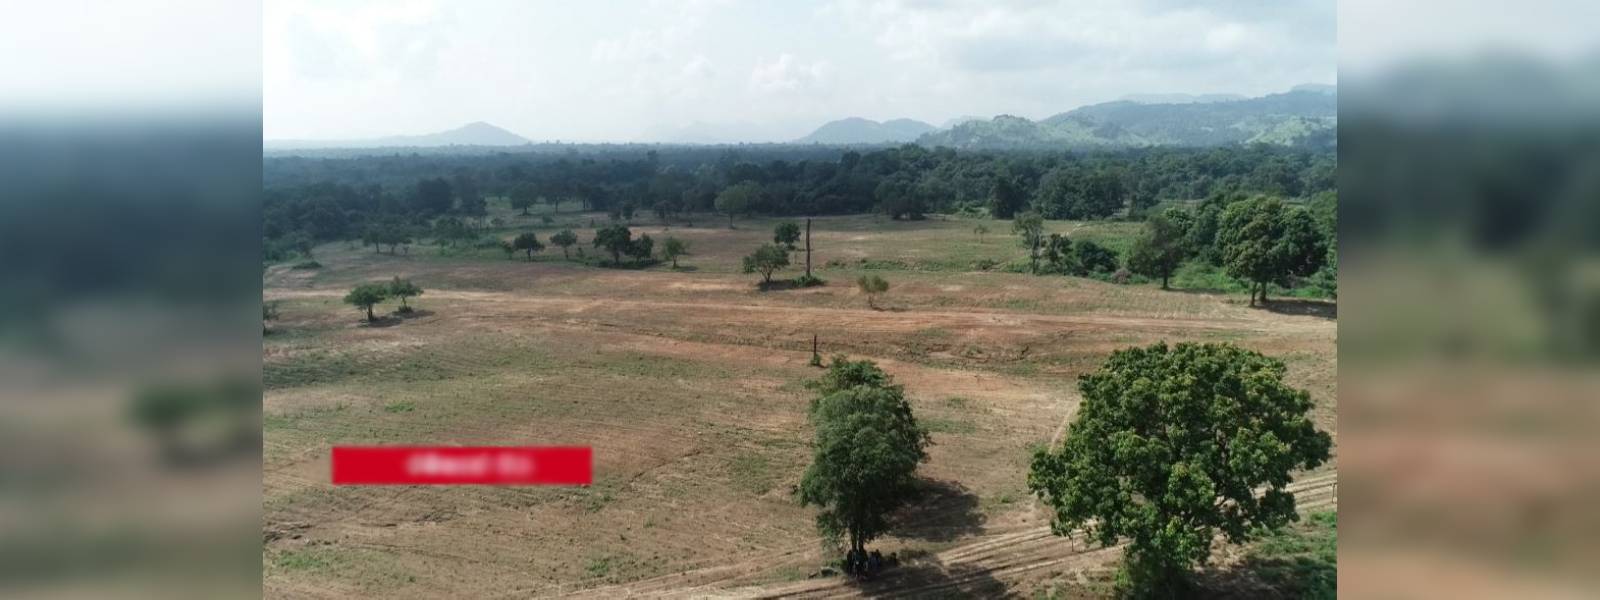 Concerns mount over clearing lands in Rambakan Oya